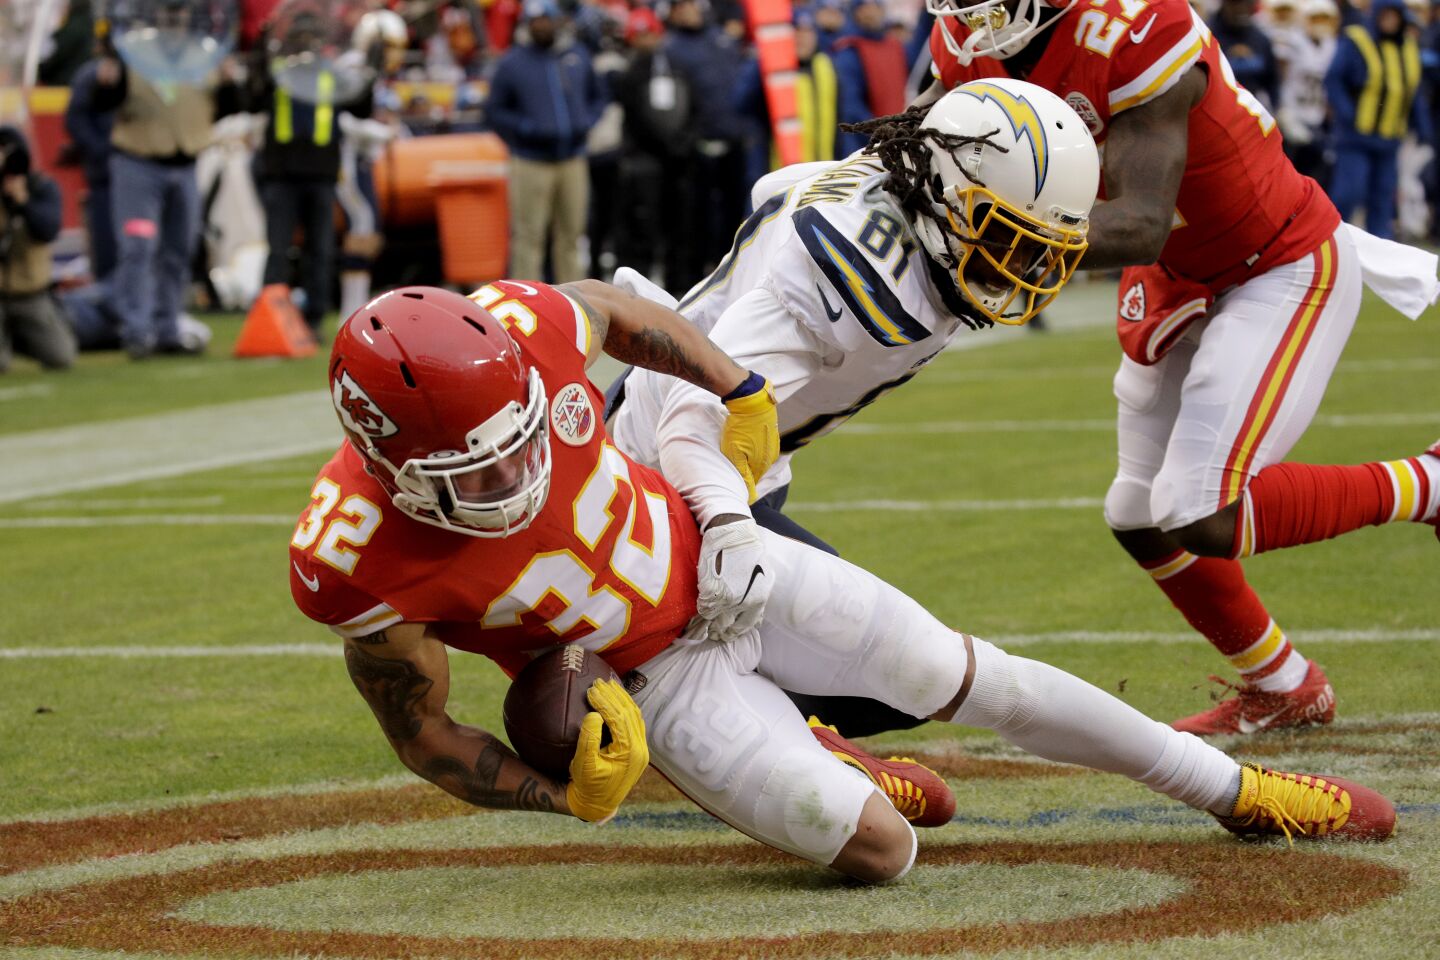 Chiefs safety Tyrann Mathieu (32) goes to the ground after intercepting a pass intended for Chargers receiver Mike Williams (81) during a game Dec. 29.